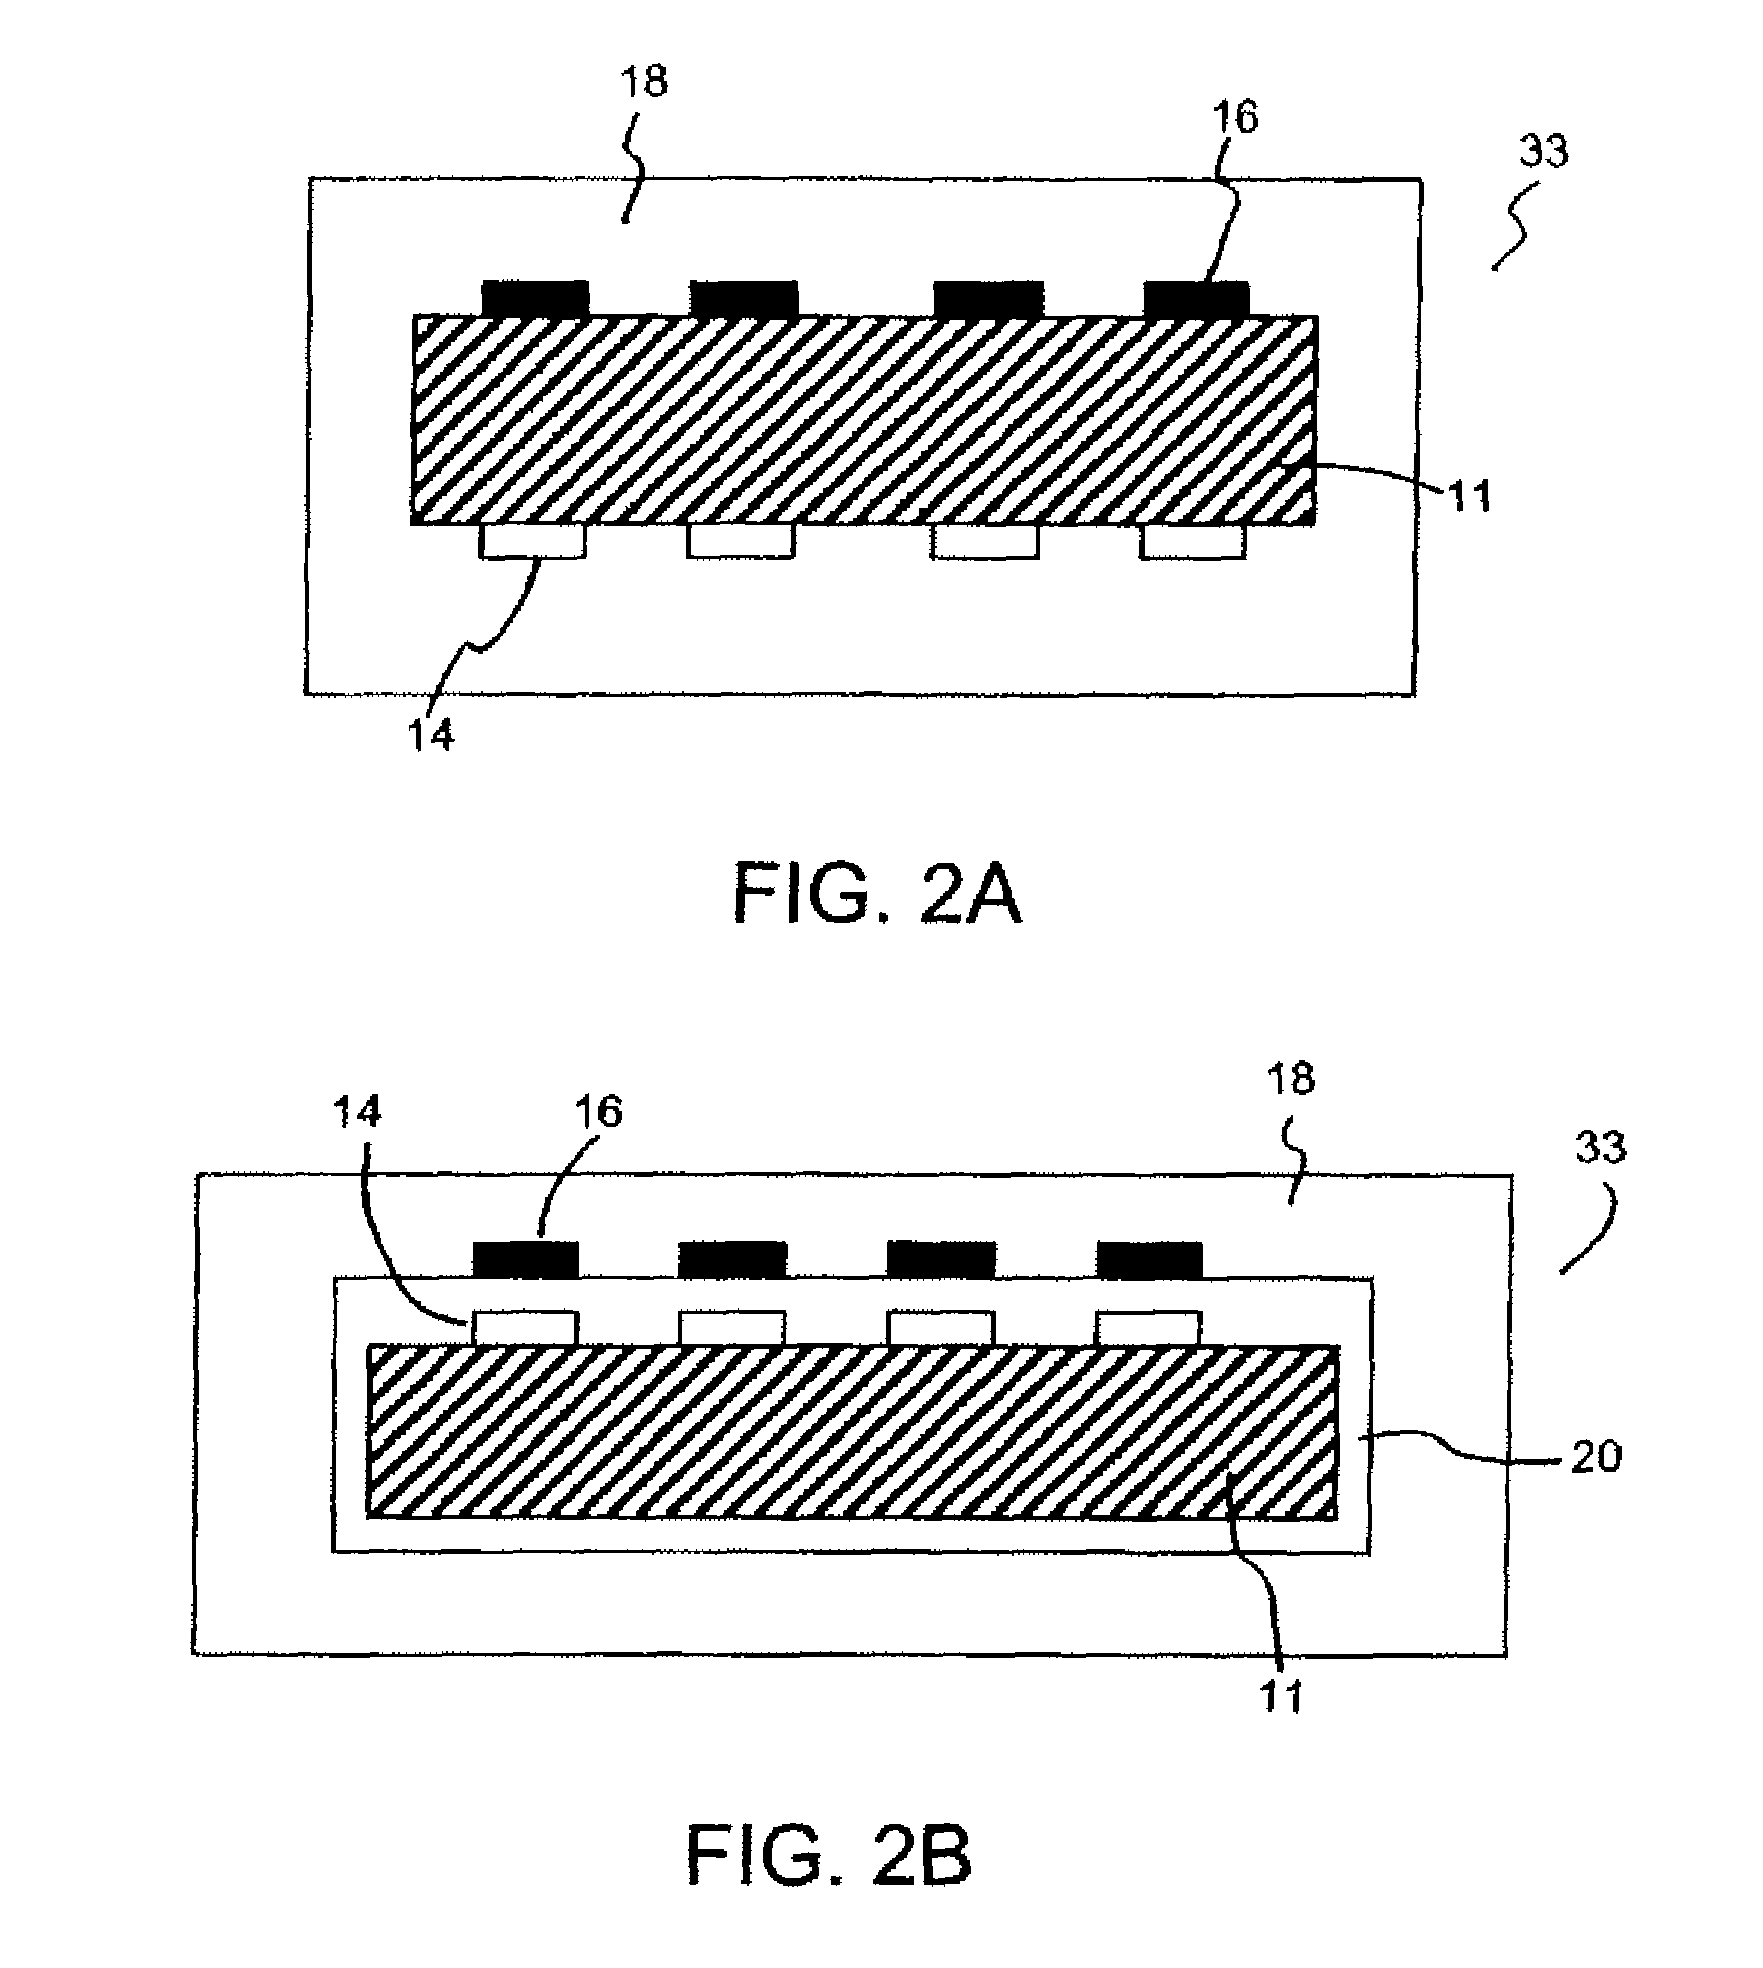 Wafer processing apparatus having a tunable electrical resistivity